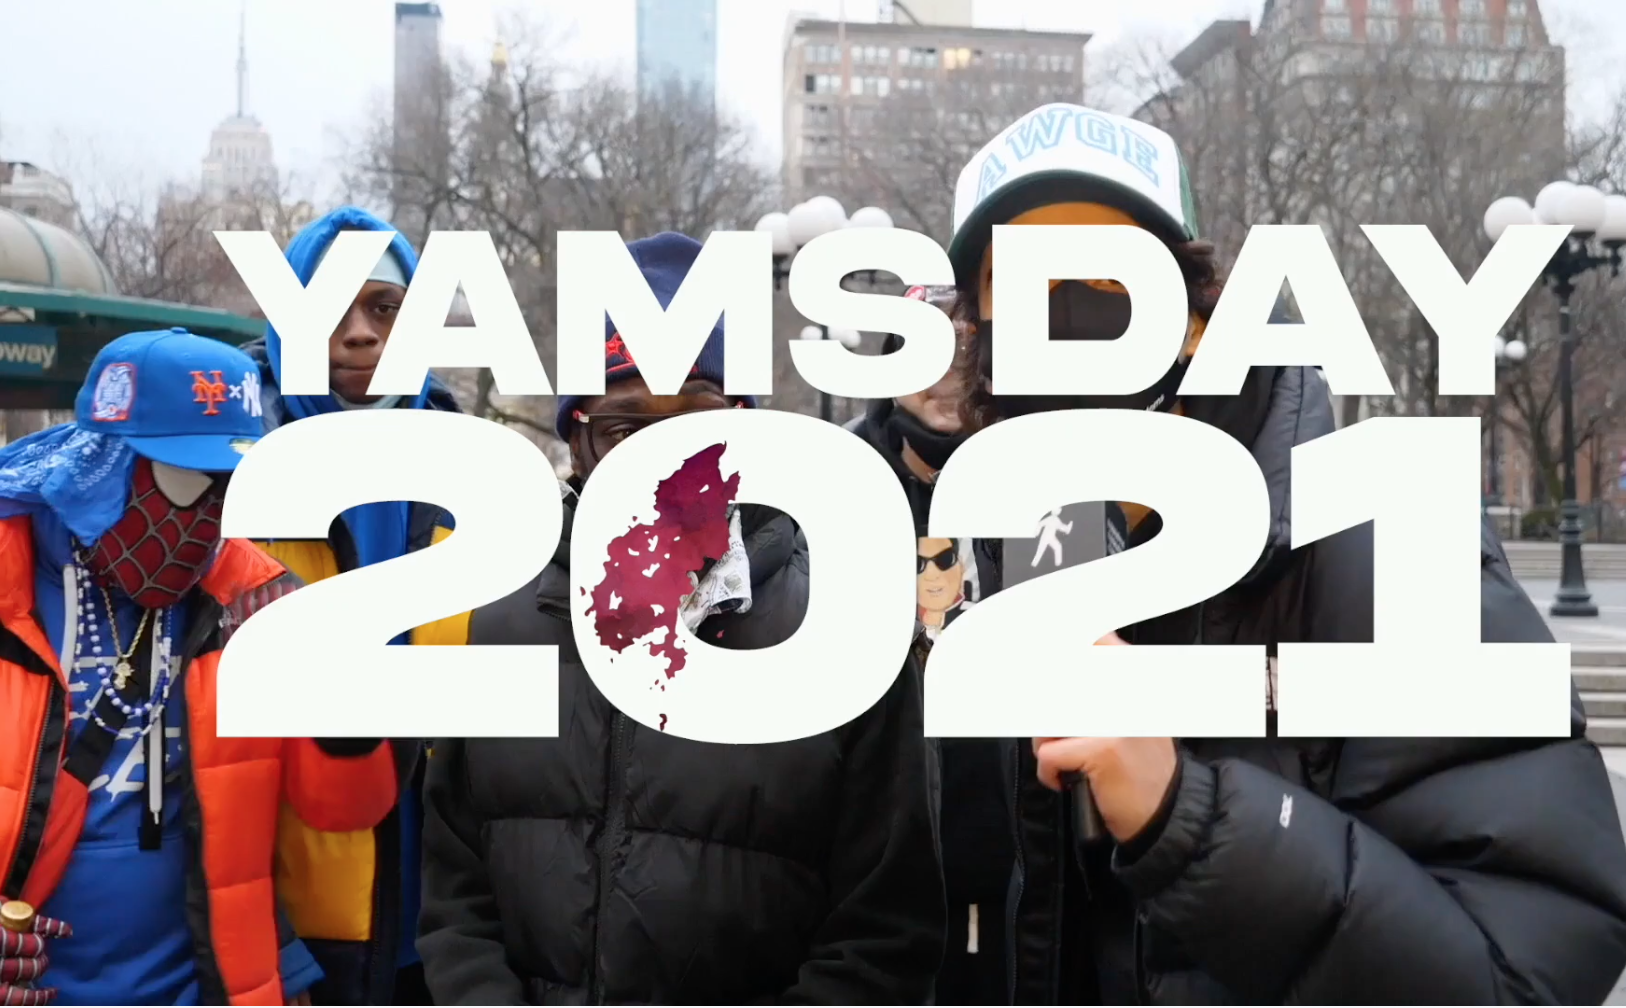 YAMS DAY 2021 DATE ANNOUNCEMENT NYGHTLY